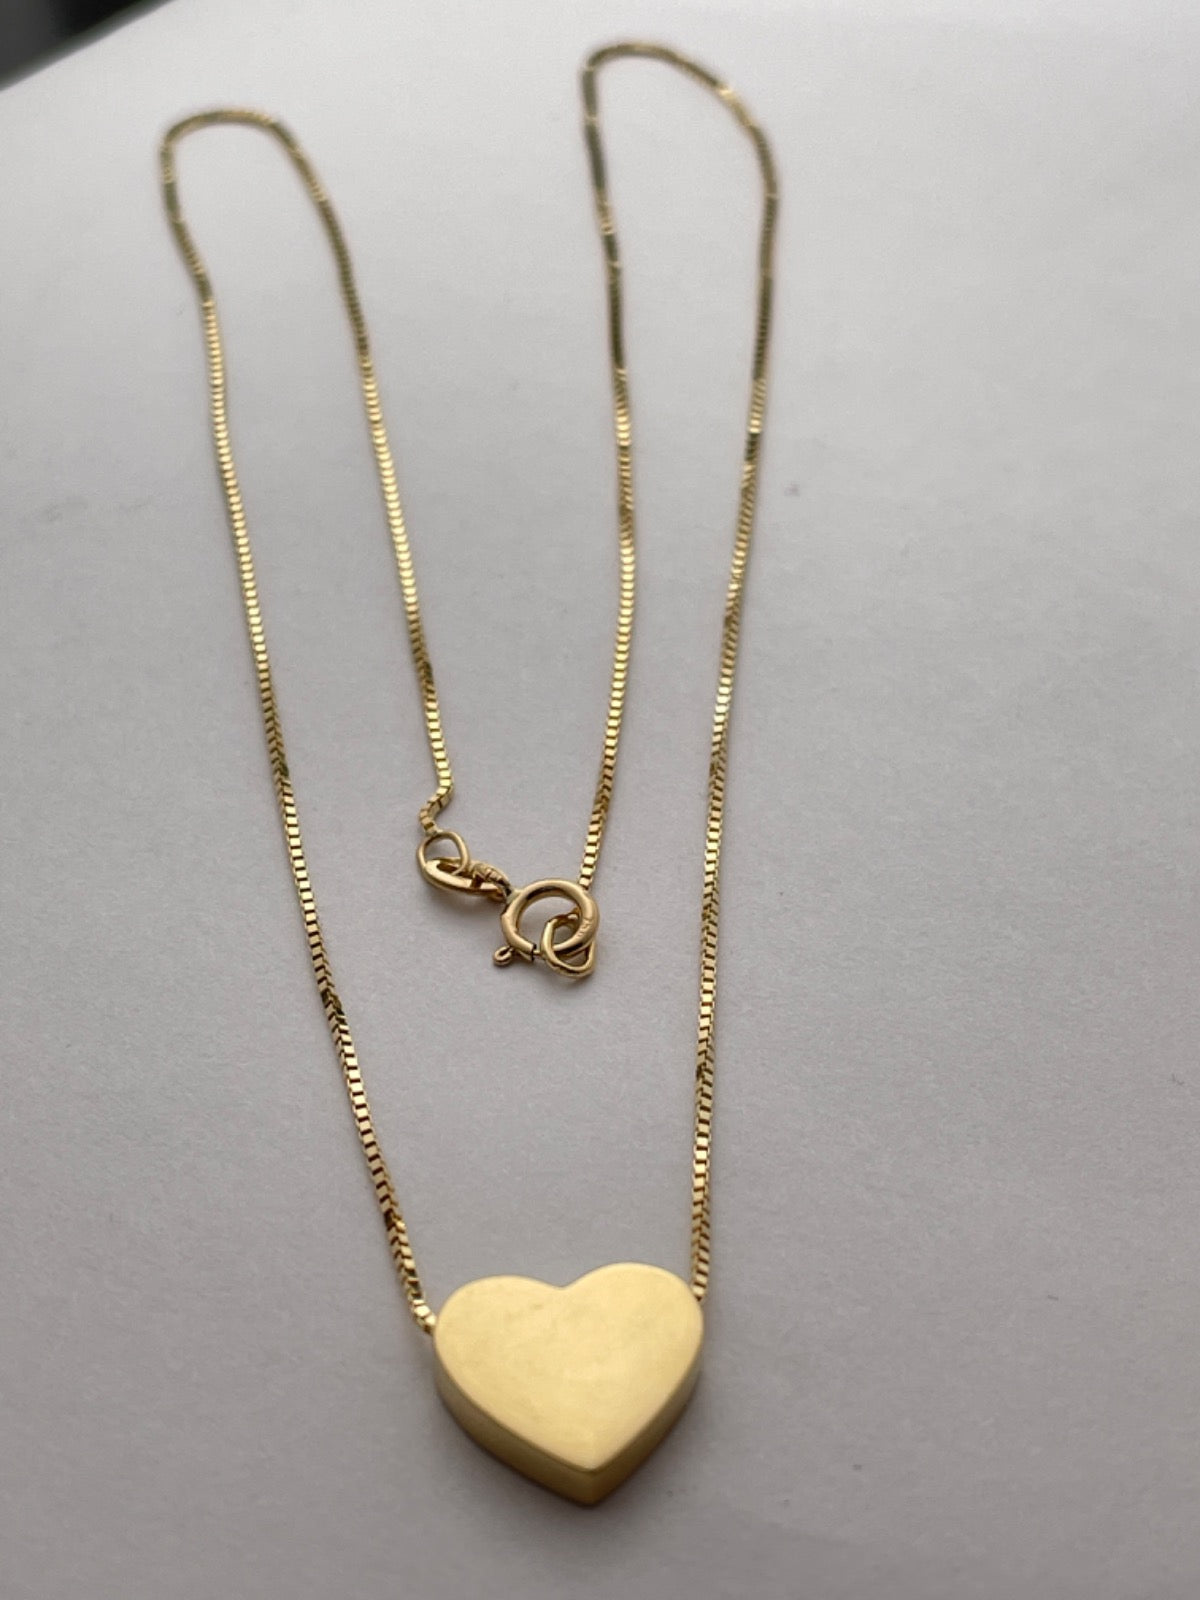 18K Yellow Gold  Charm Necklace Set